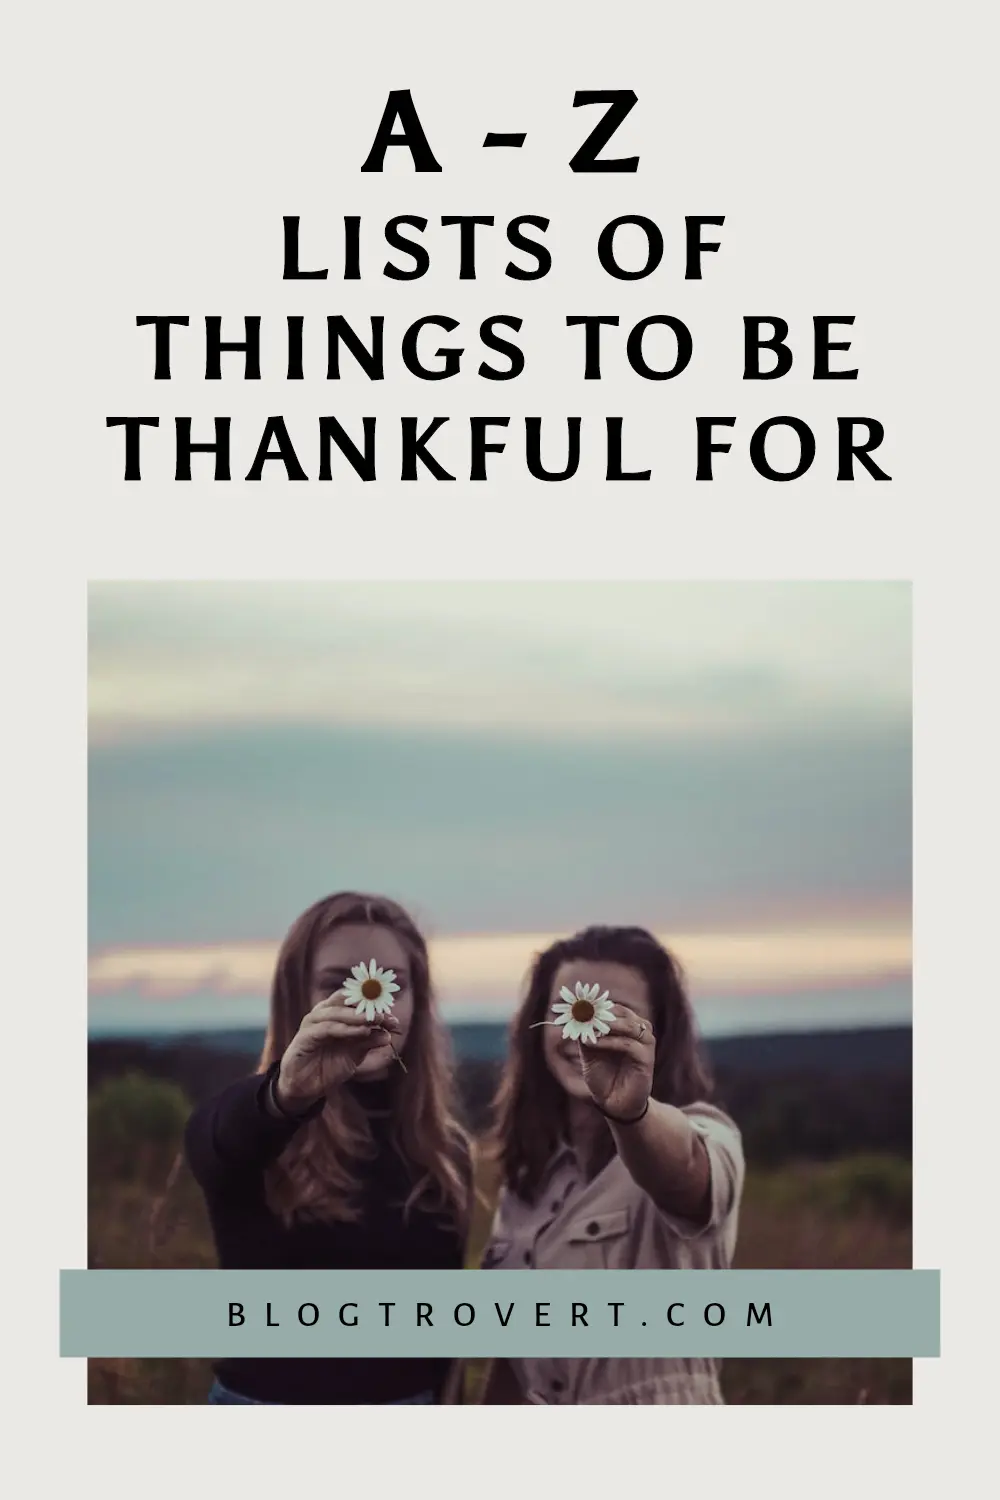 A-Z Unique Gratitude List Ideas - 100 things to be thankful for everyday 2